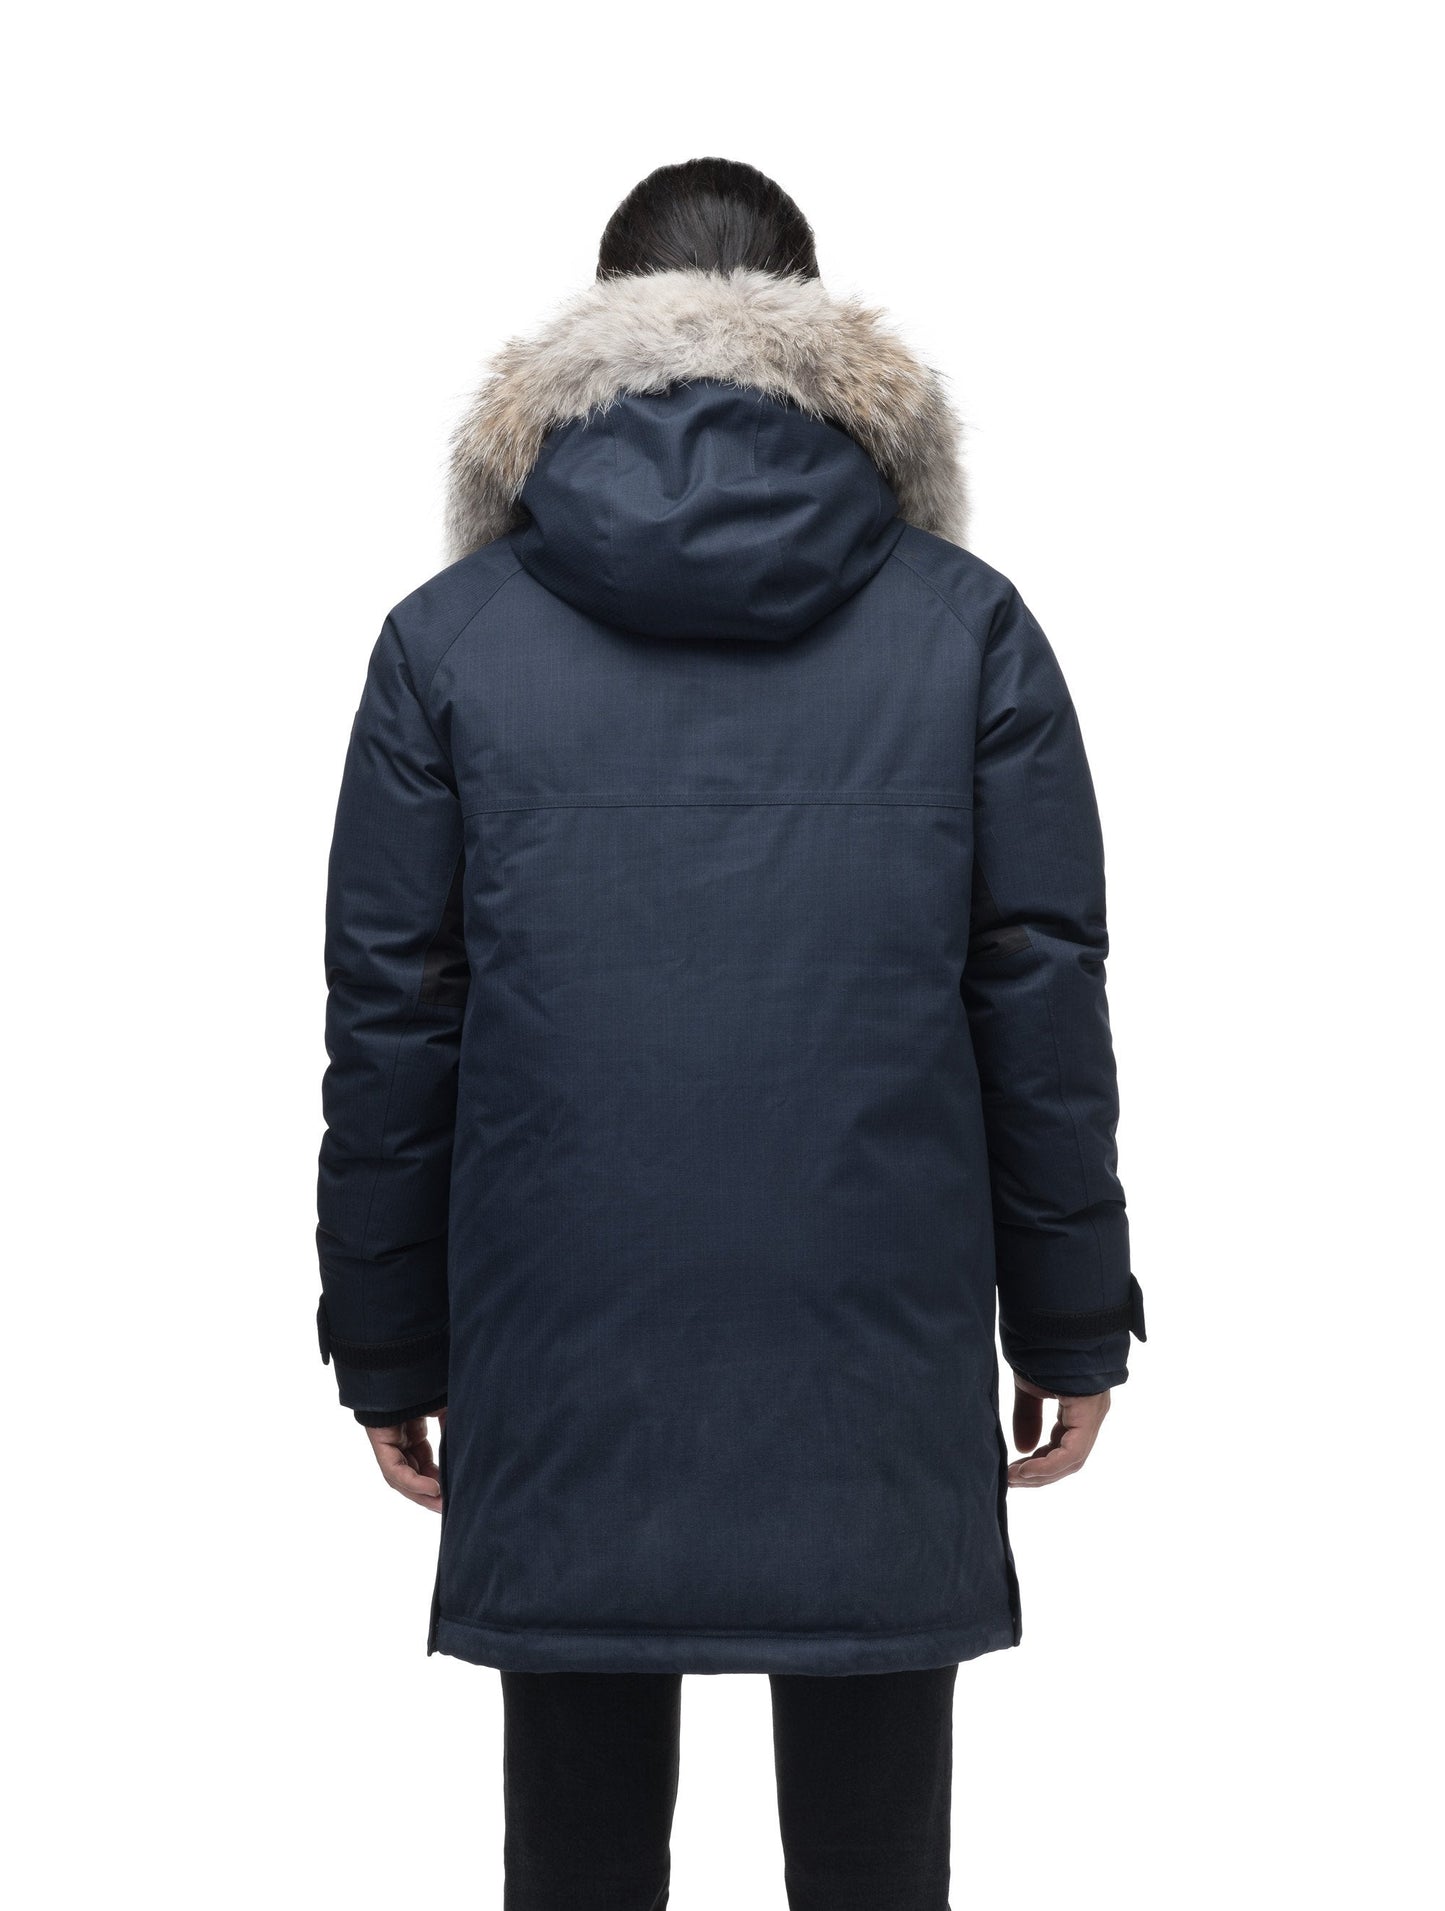 Men's thigh length down-filled parka with removable hood and removable coyote fur trim in Navy